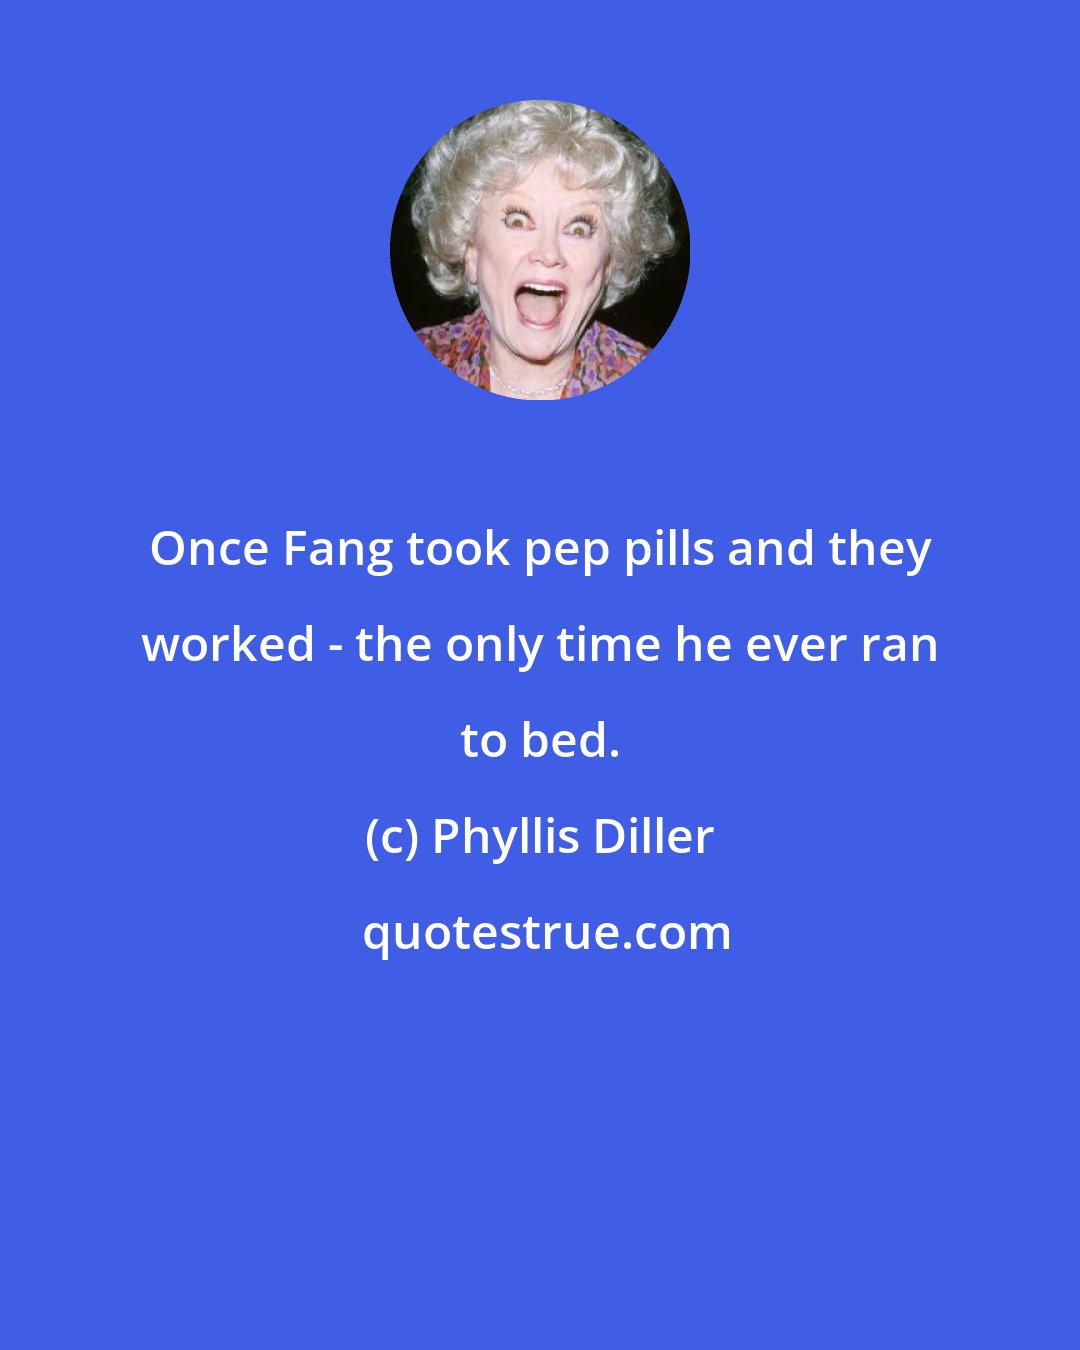 Phyllis Diller: Once Fang took pep pills and they worked - the only time he ever ran to bed.